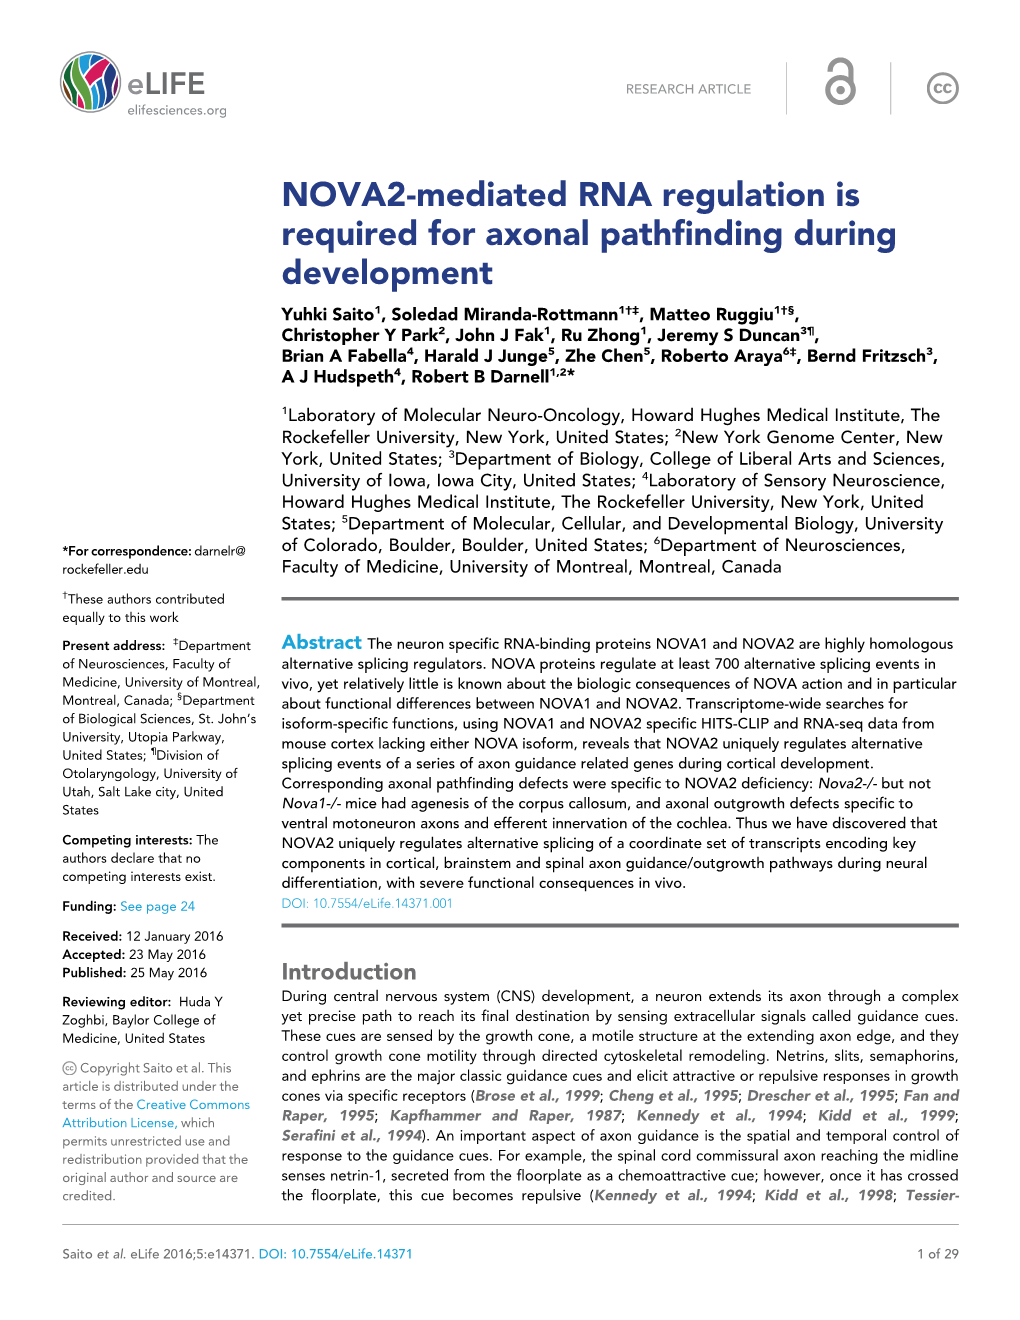 NOVA2-Mediated RNA Regulation Is Required for Axonal Pathfinding